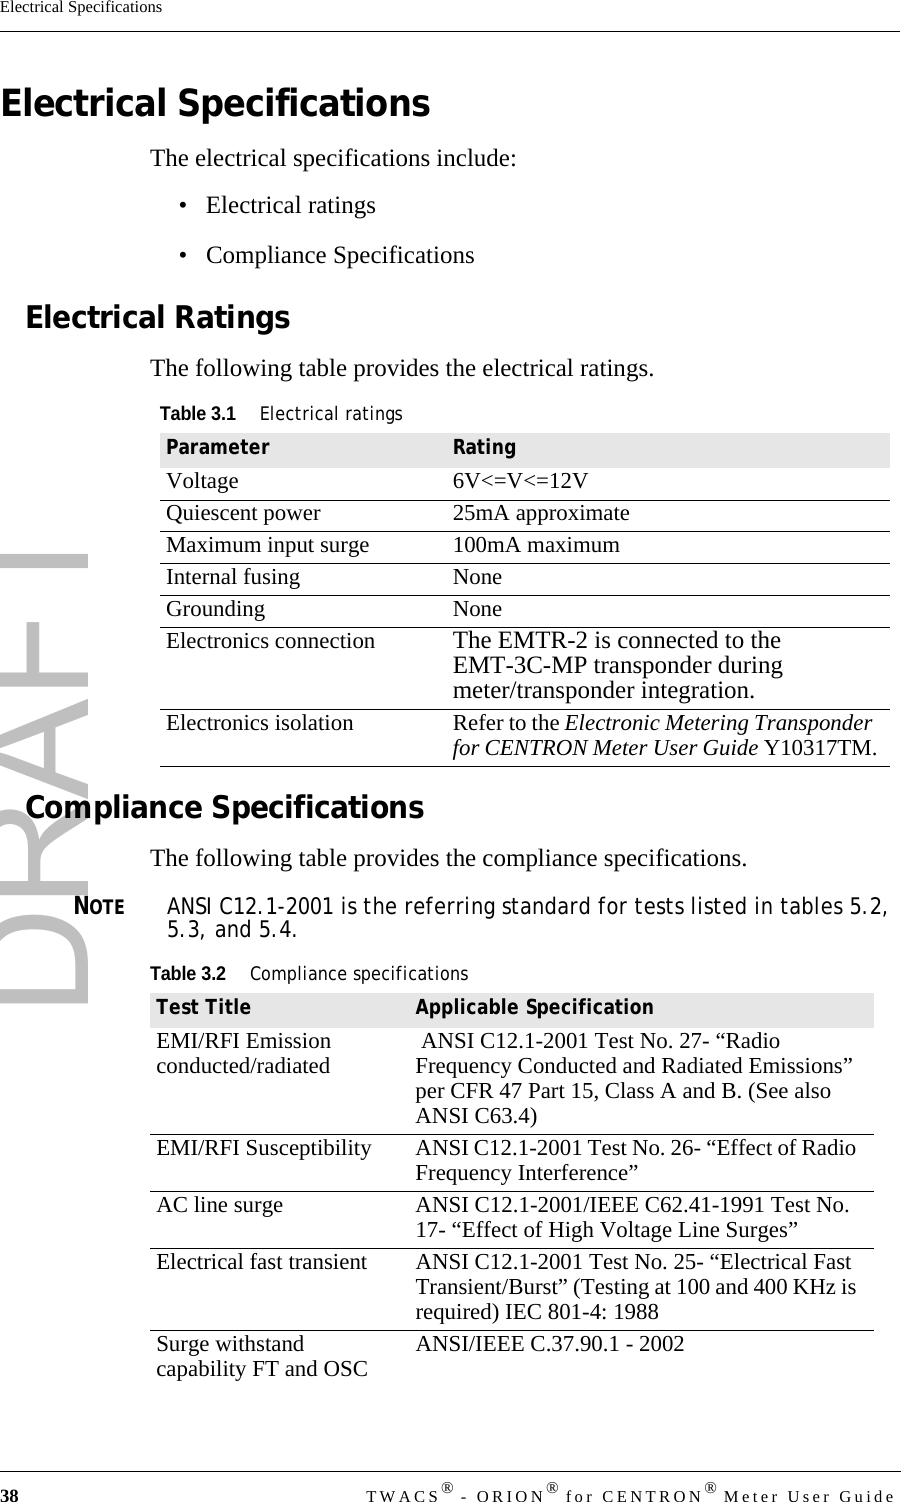 DRAFT38 TWACS® - ORION® for CENTRON® Meter User GuideElectrical SpecificationsElectrical SpecificationsThe electrical specifications include:• Electrical ratings• Compliance SpecificationsElectrical RatingsThe following table provides the electrical ratings.Compliance SpecificationsThe following table provides the compliance specifications.NOTEANSI C12.1-2001 is the referring standard for tests listed in tables 5.2, 5.3, and 5.4. Table 3.1Electrical ratingsParameter RatingVoltage 6V&lt;=V&lt;=12VQuiescent power 25mA approximateMaximum input surge 100mA maximumInternal fusing NoneGrounding NoneElectronics connection The EMTR-2 is connected to the EMT-3C-MP transponder during meter/transponder integration.Electronics isolation Refer to the Electronic Metering Transponder for CENTRON Meter User Guide Y10317TM.Table 3.2Compliance specificationsTest Title Applicable SpecificationEMI/RFI Emission conducted/radiated  ANSI C12.1-2001 Test No. 27- “Radio Frequency Conducted and Radiated Emissions” per CFR 47 Part 15, Class A and B. (See also ANSI C63.4)EMI/RFI Susceptibility ANSI C12.1-2001 Test No. 26- “Effect of Radio Frequency Interference” AC line surge ANSI C12.1-2001/IEEE C62.41-1991 Test No. 17- “Effect of High Voltage Line Surges” Electrical fast transient ANSI C12.1-2001 Test No. 25- “Electrical Fast Transient/Burst” (Testing at 100 and 400 KHz is required) IEC 801-4: 1988 Surge withstand capability FT and OSC ANSI/IEEE C.37.90.1 - 2002